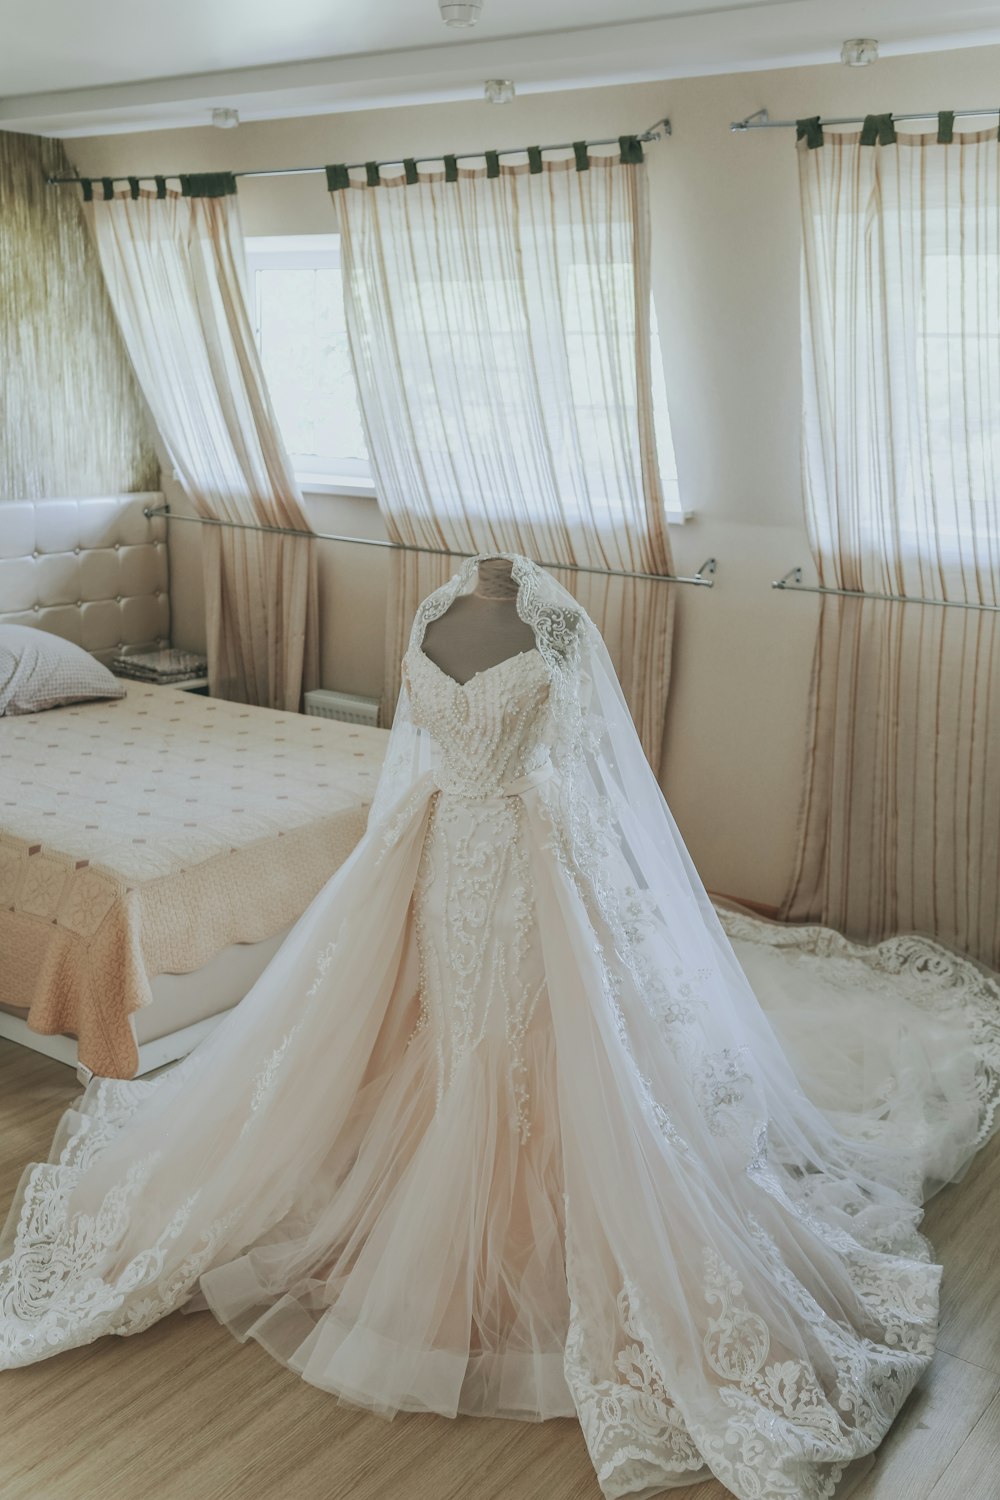 white wedding gown on bed